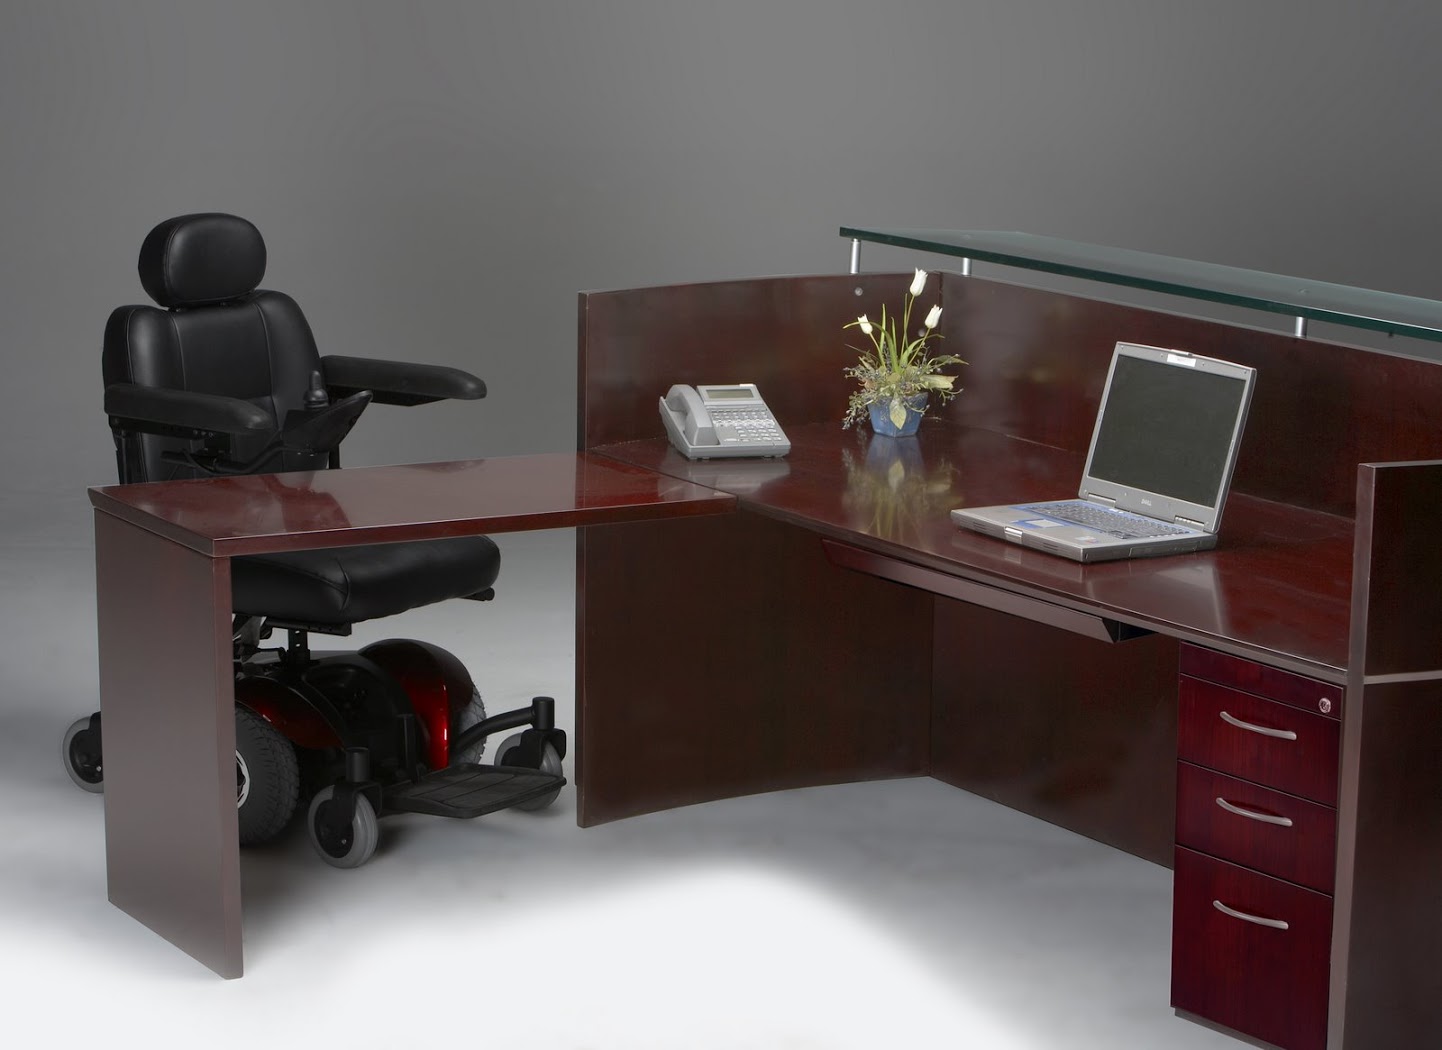 Napoli Wood Veneer Reception Station With Ada Accessible Return 3